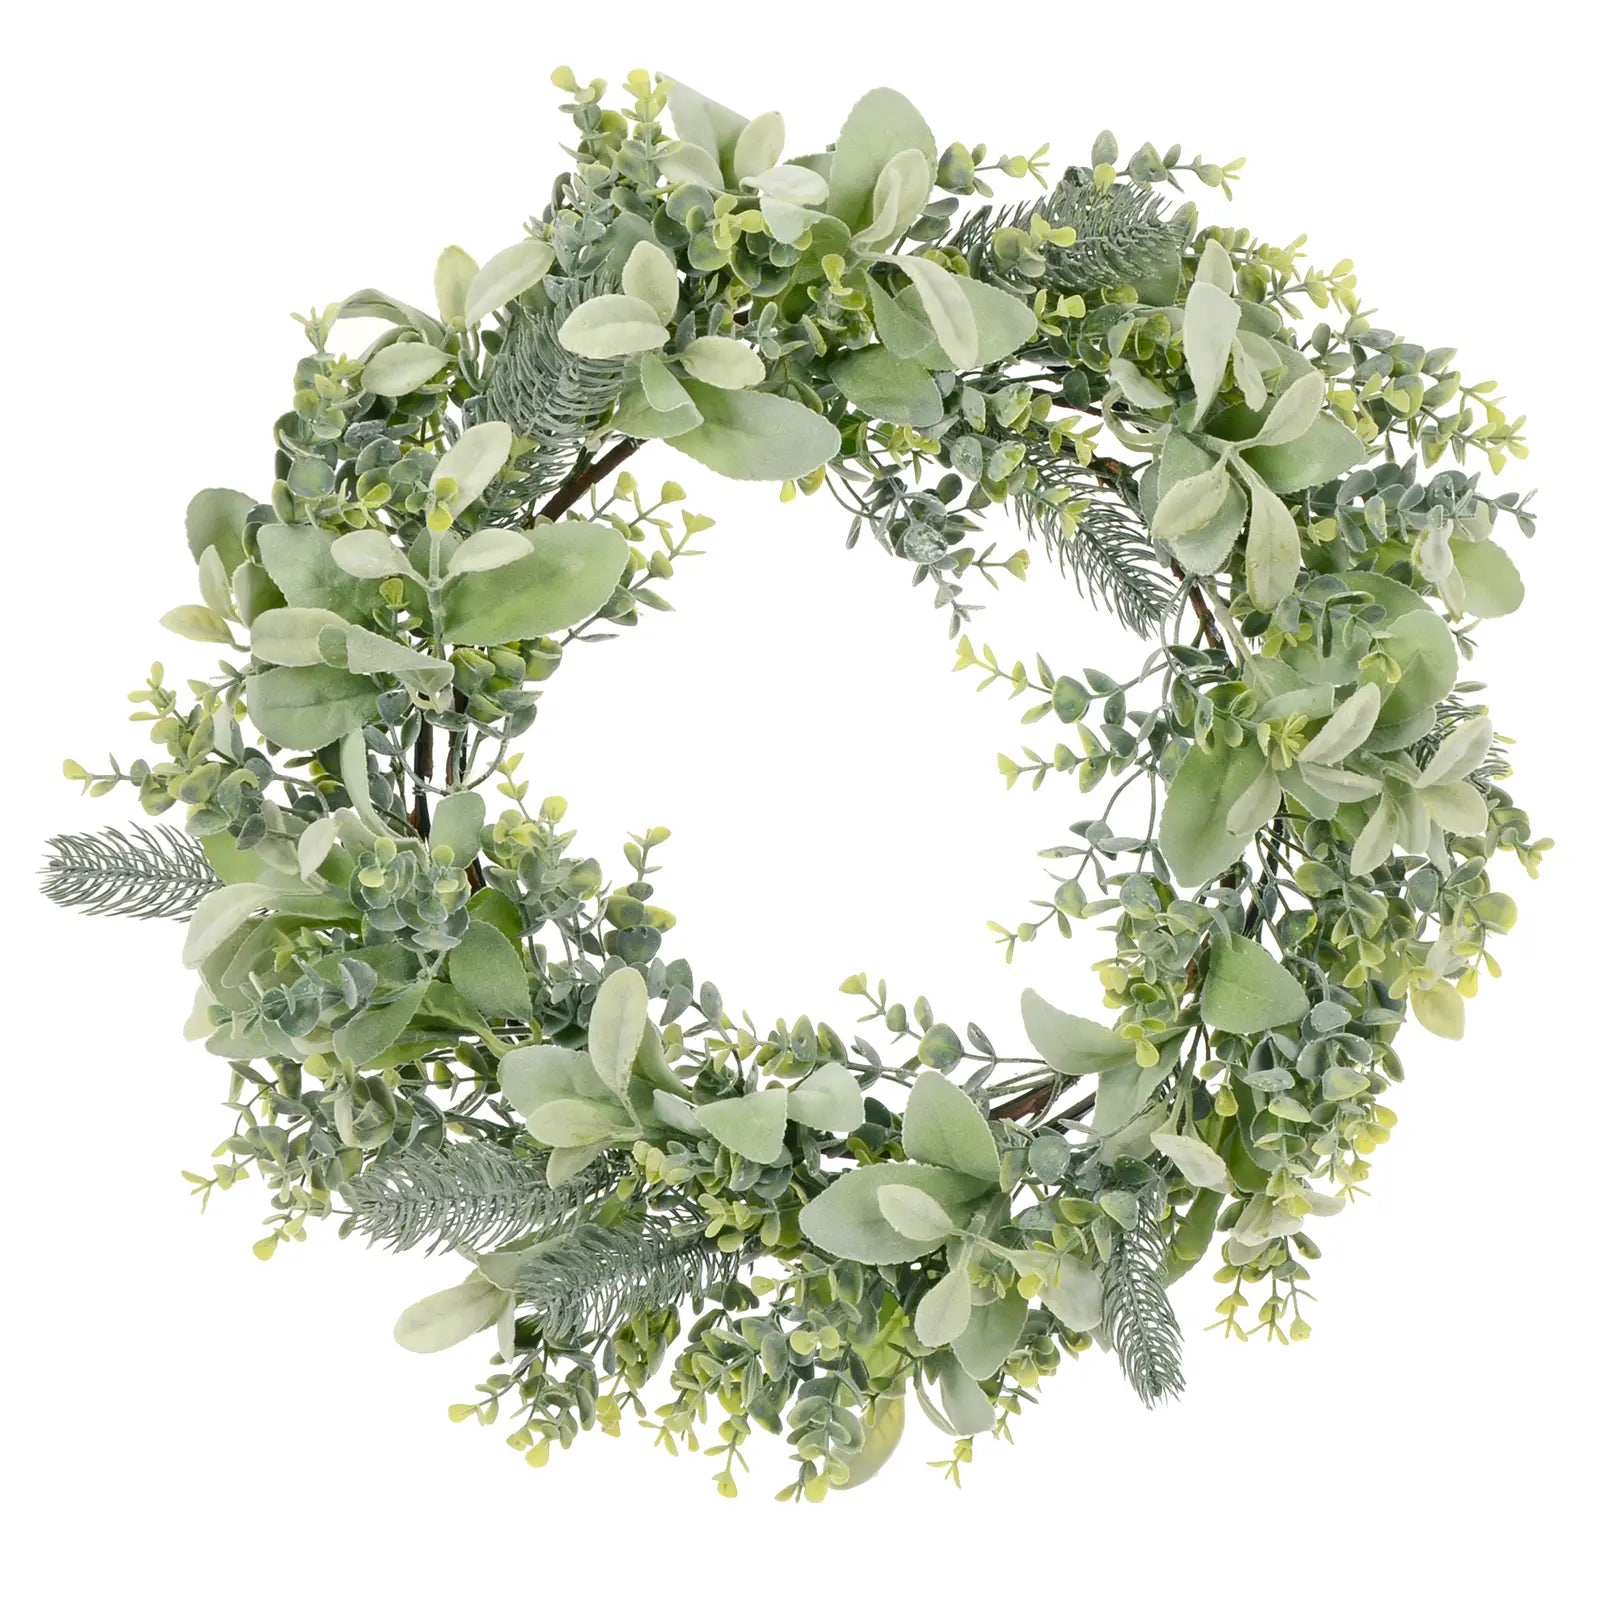 mr crimbo mixed green foliage with eucalyptus leaves delicately frosted for wintry look